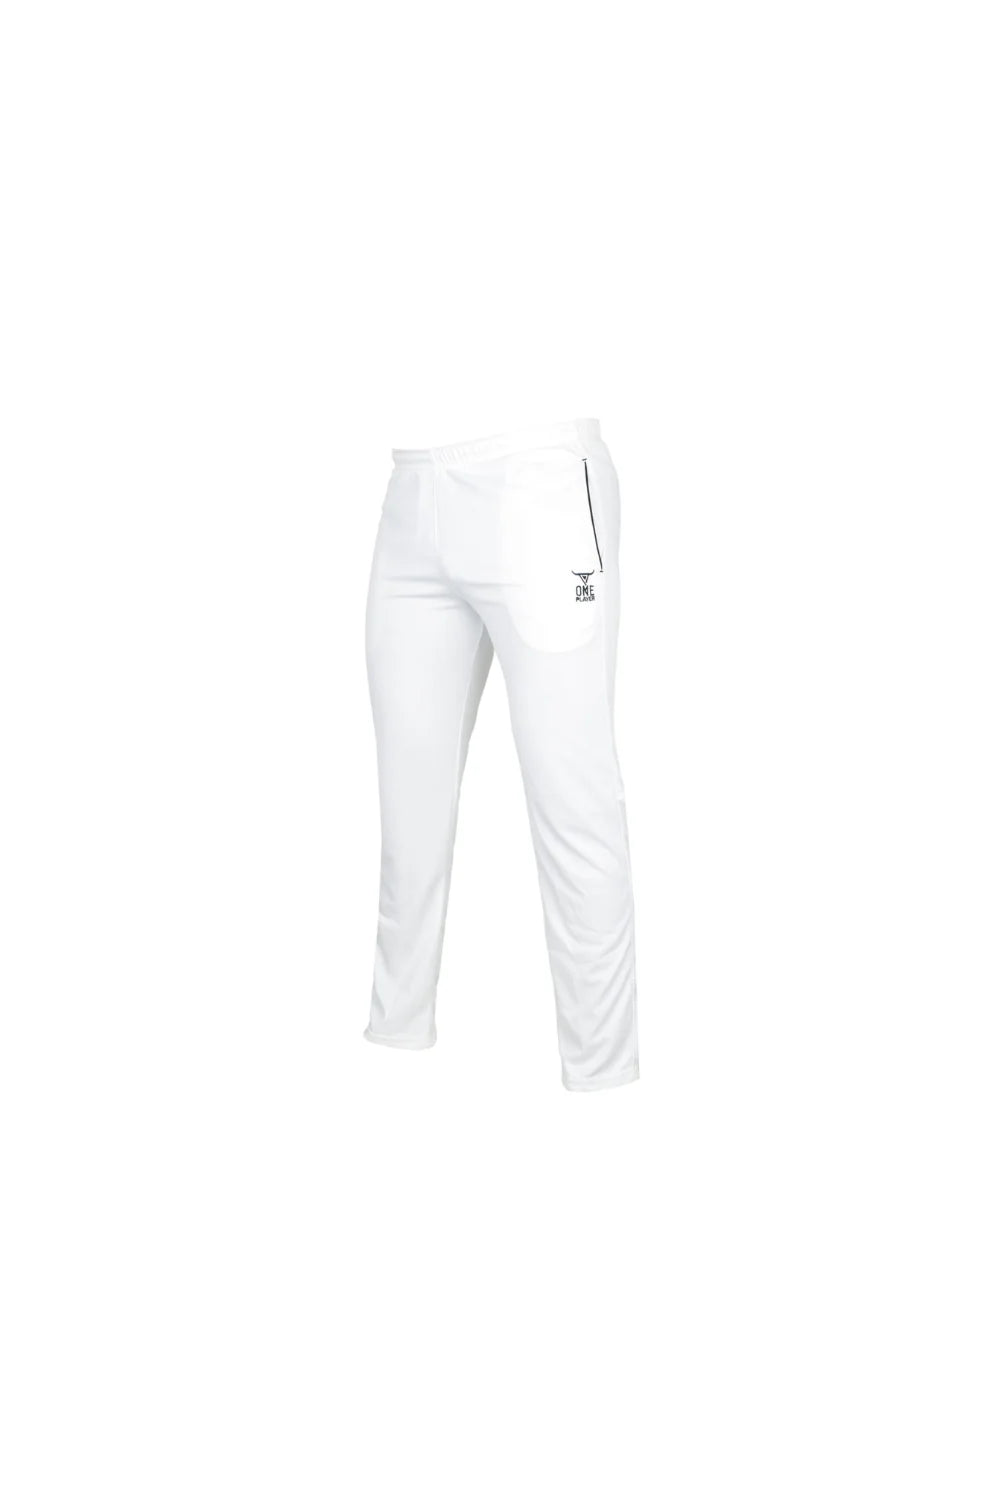 Buy SS SKIN FIT - LOWER Online at Best Price | SS Cricket